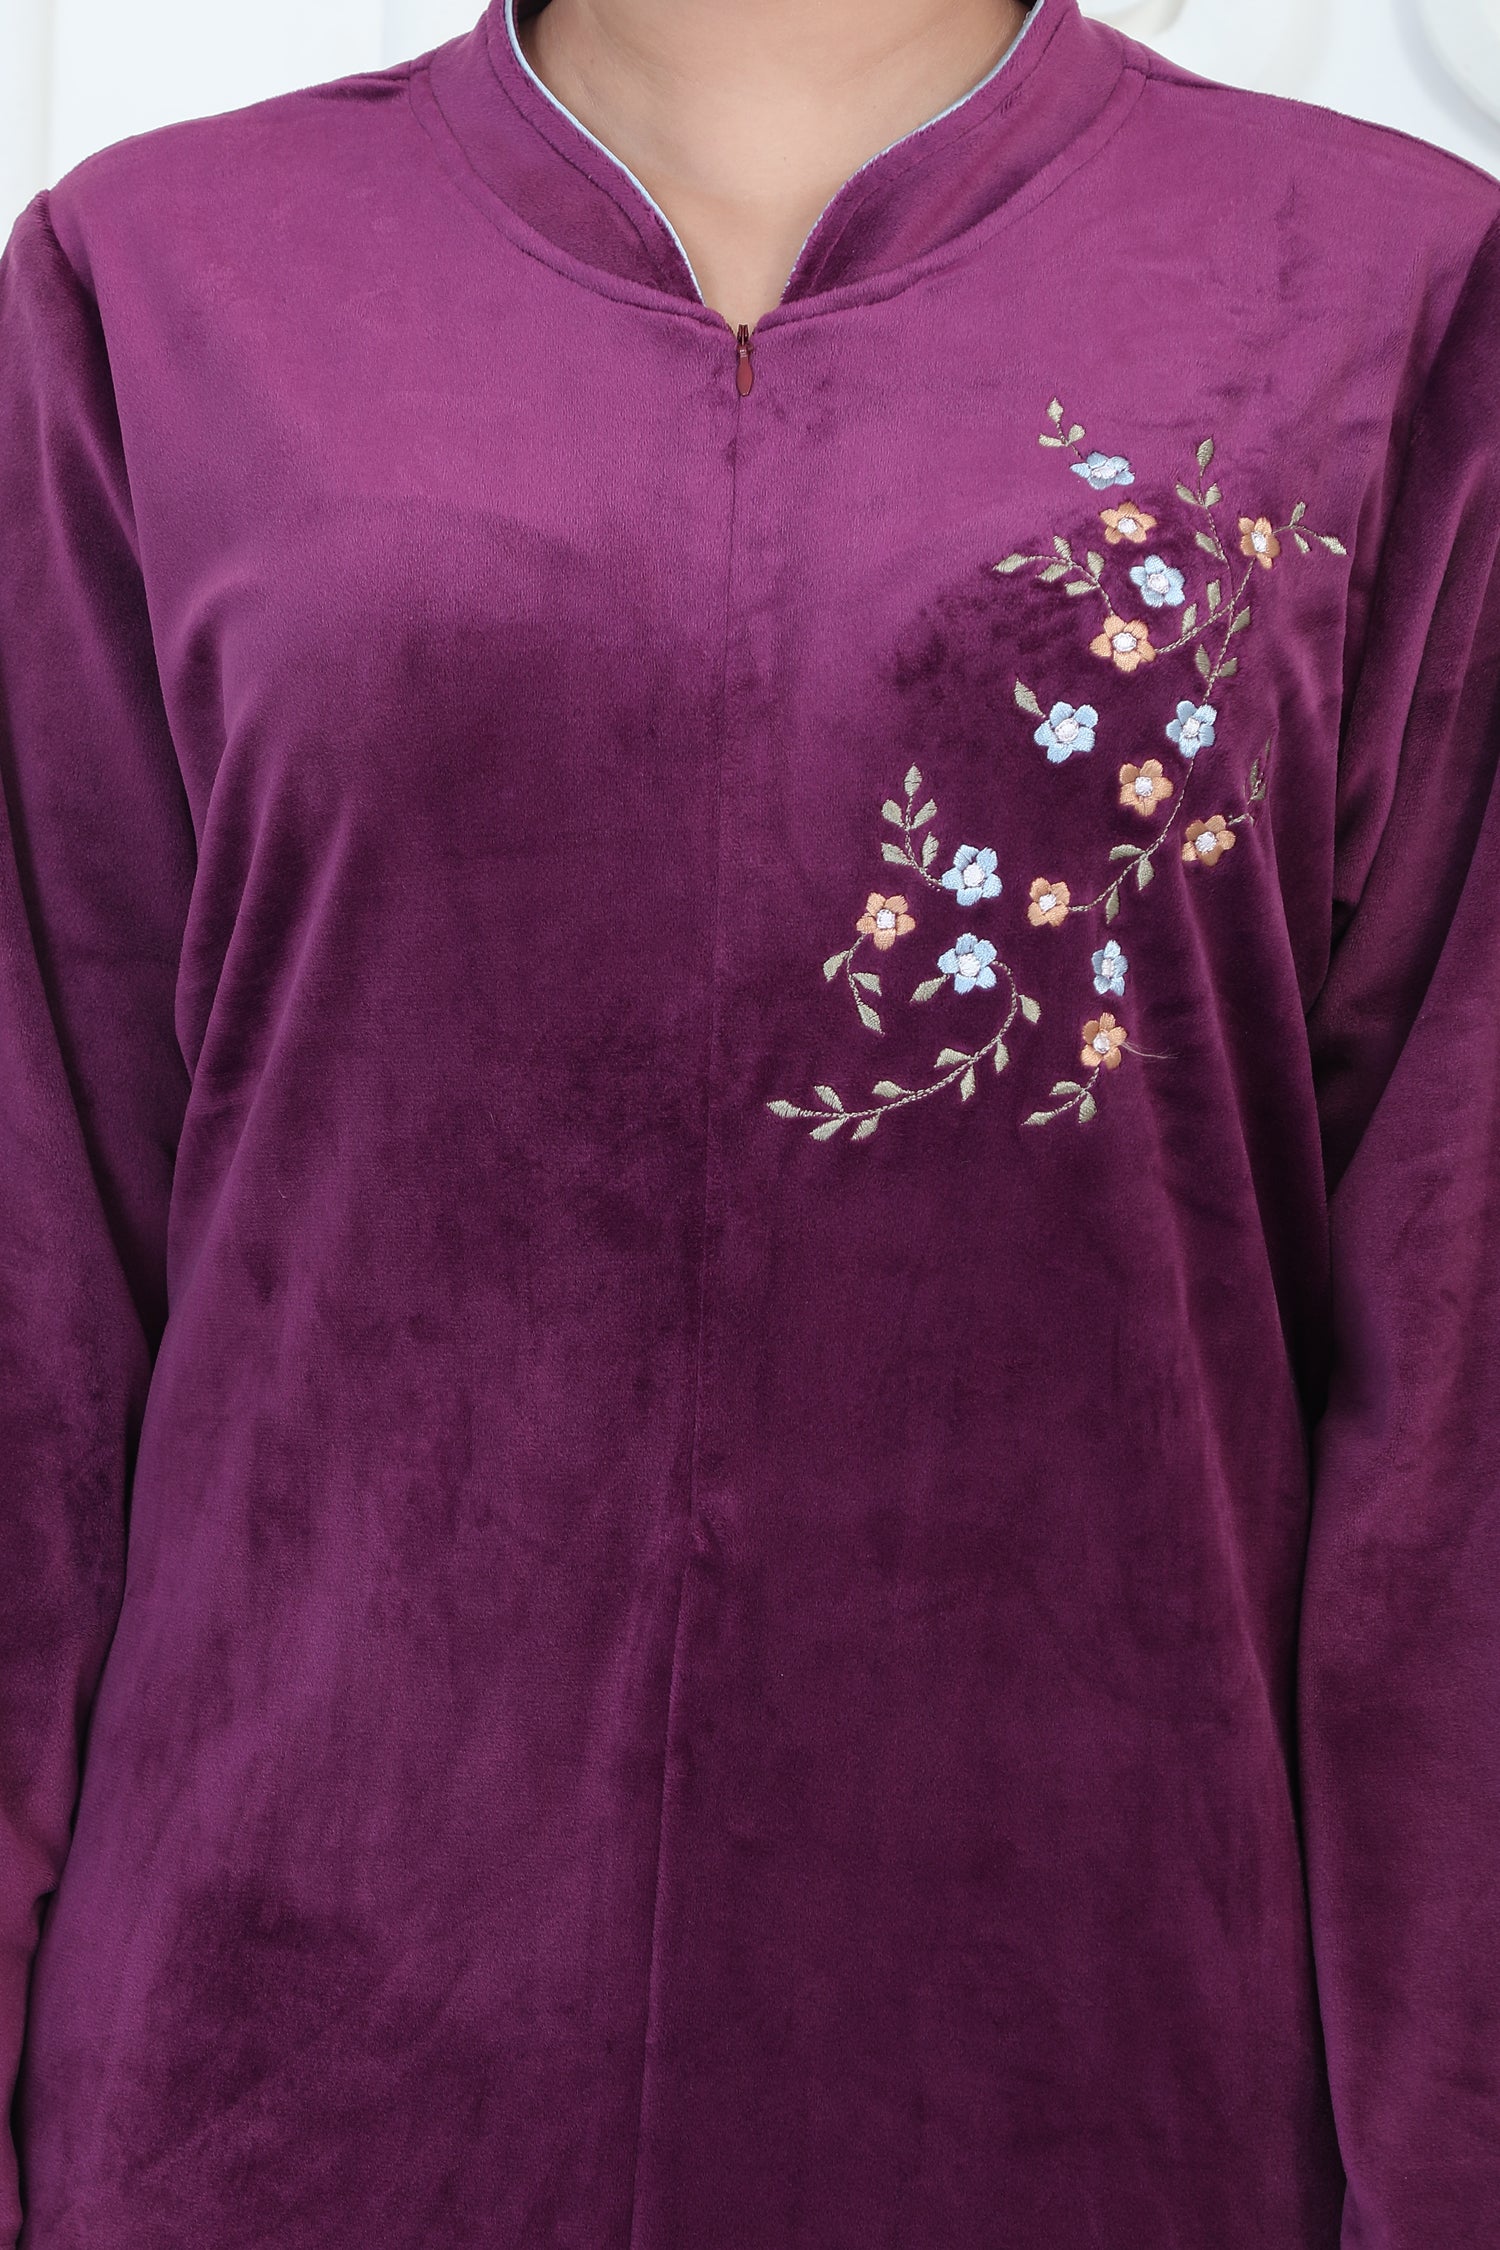 Floral Embroidered Tunic Stylish Nighty